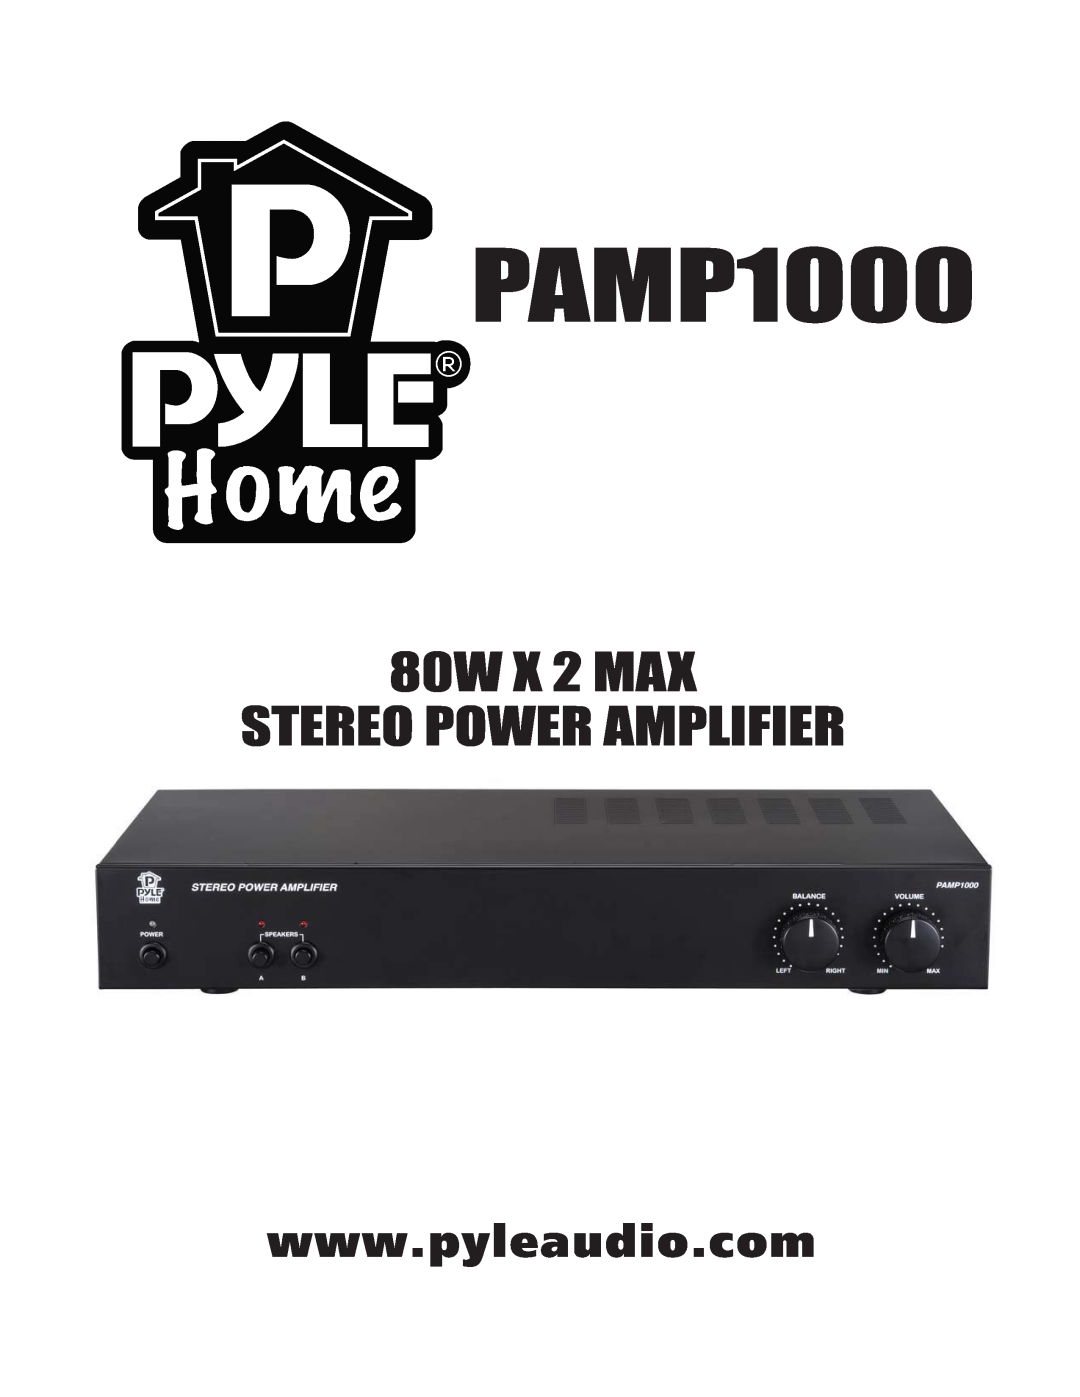 PYLE Audio PAMP1000 manual 80W X 2 MAX STEREO POWER AMPLIFIER 